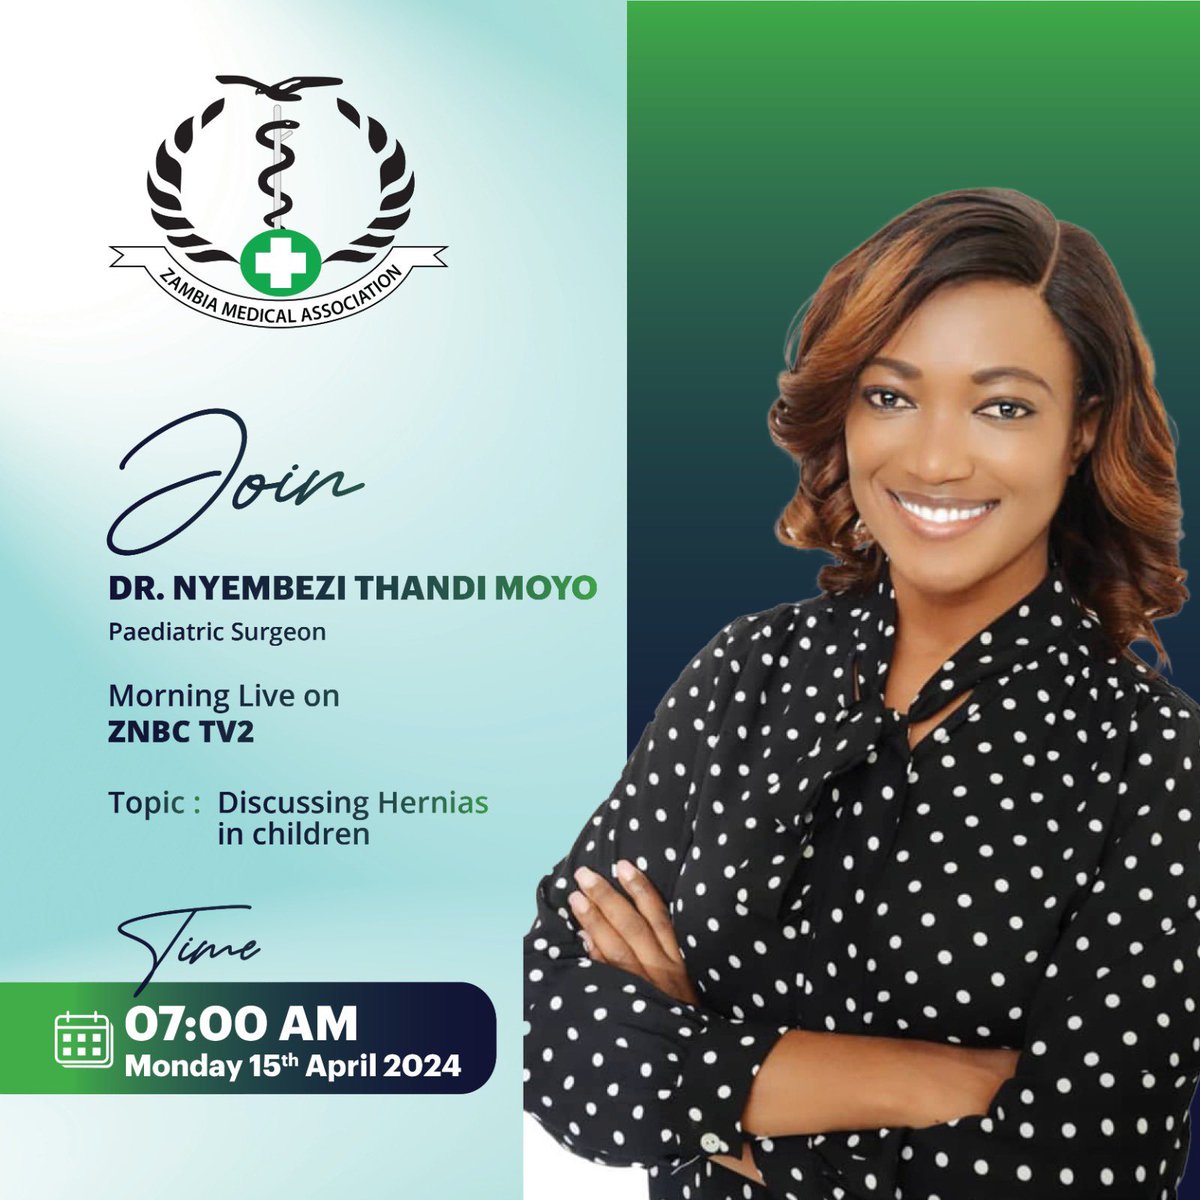 Tomorrow , the 15th of April, 2024, the Zambia Medical Association calls you to join University Teaching Hospitals Paediatrics Surgeon Dr. Nyembezi Moyo as she talks about Hernias in Children.